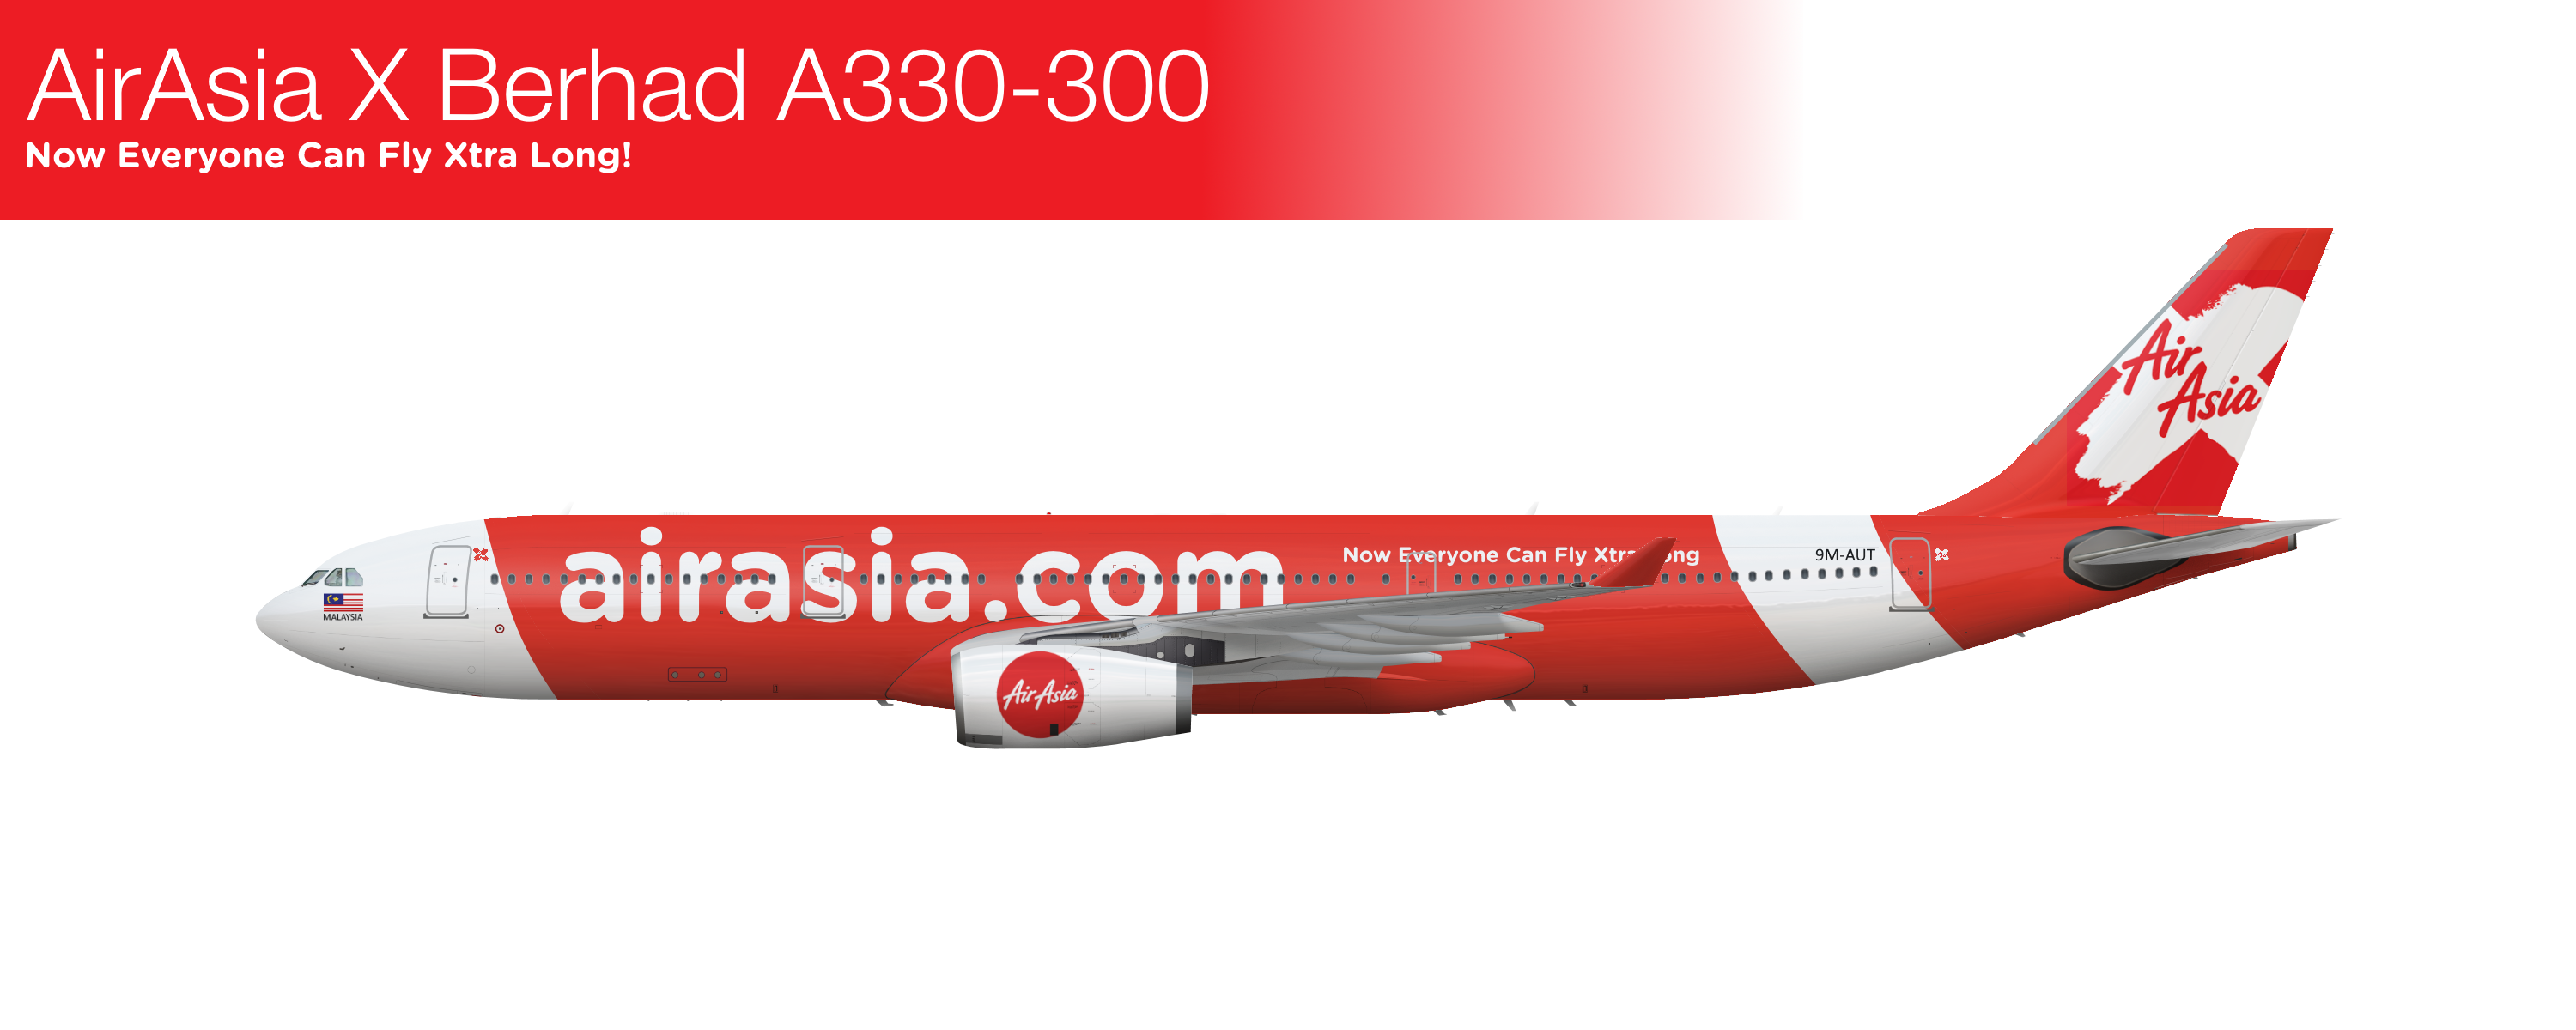 Airasia X Berhad A330 300 Irl Stuff By Me Gallery Airline Empires